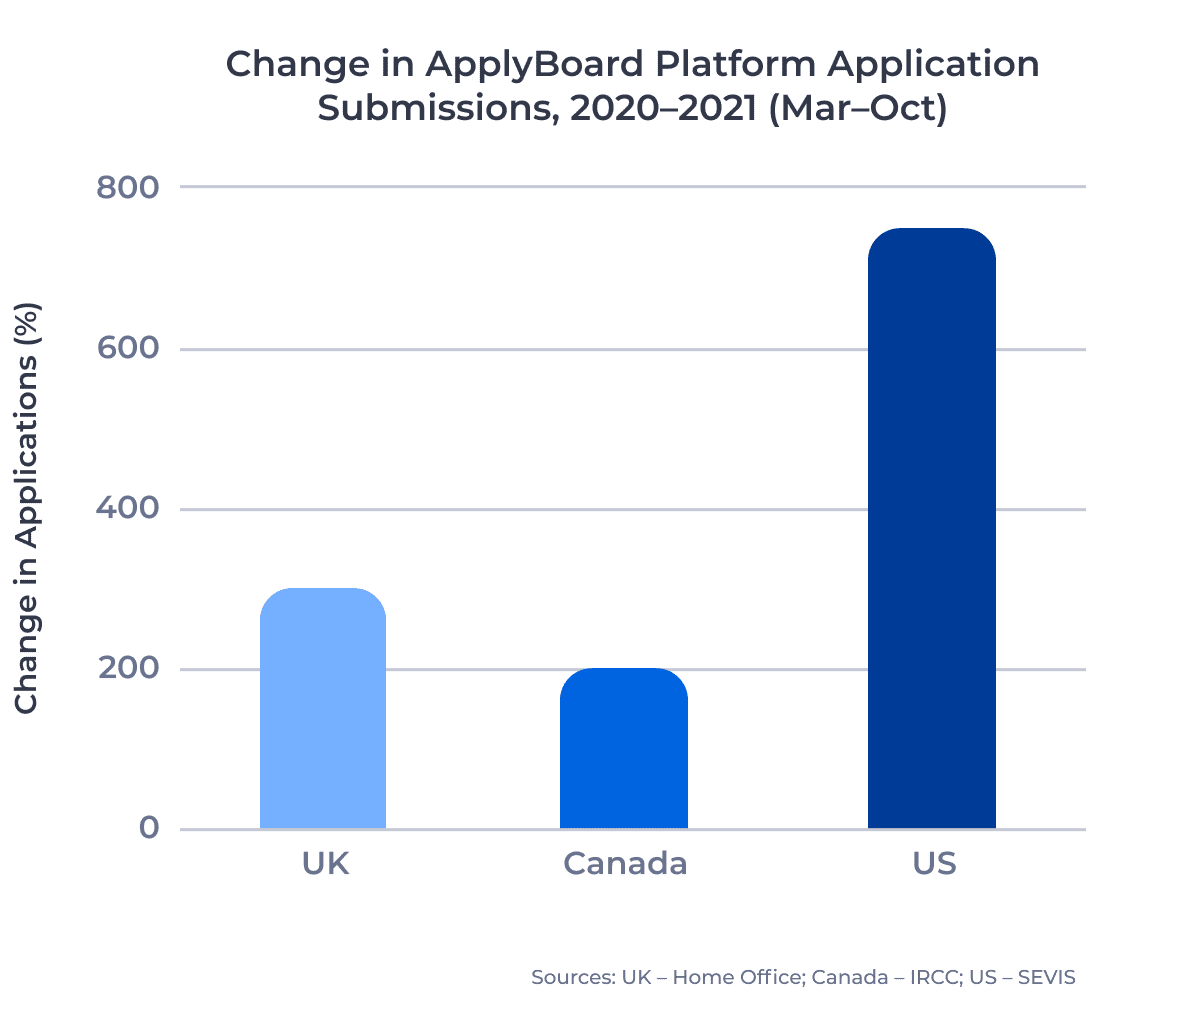 Bar chart showing the percentage change in the number of applications submitted on the ApplyBoard Platform for the US, the UK, and Canada between March and October 2020 and 2021.